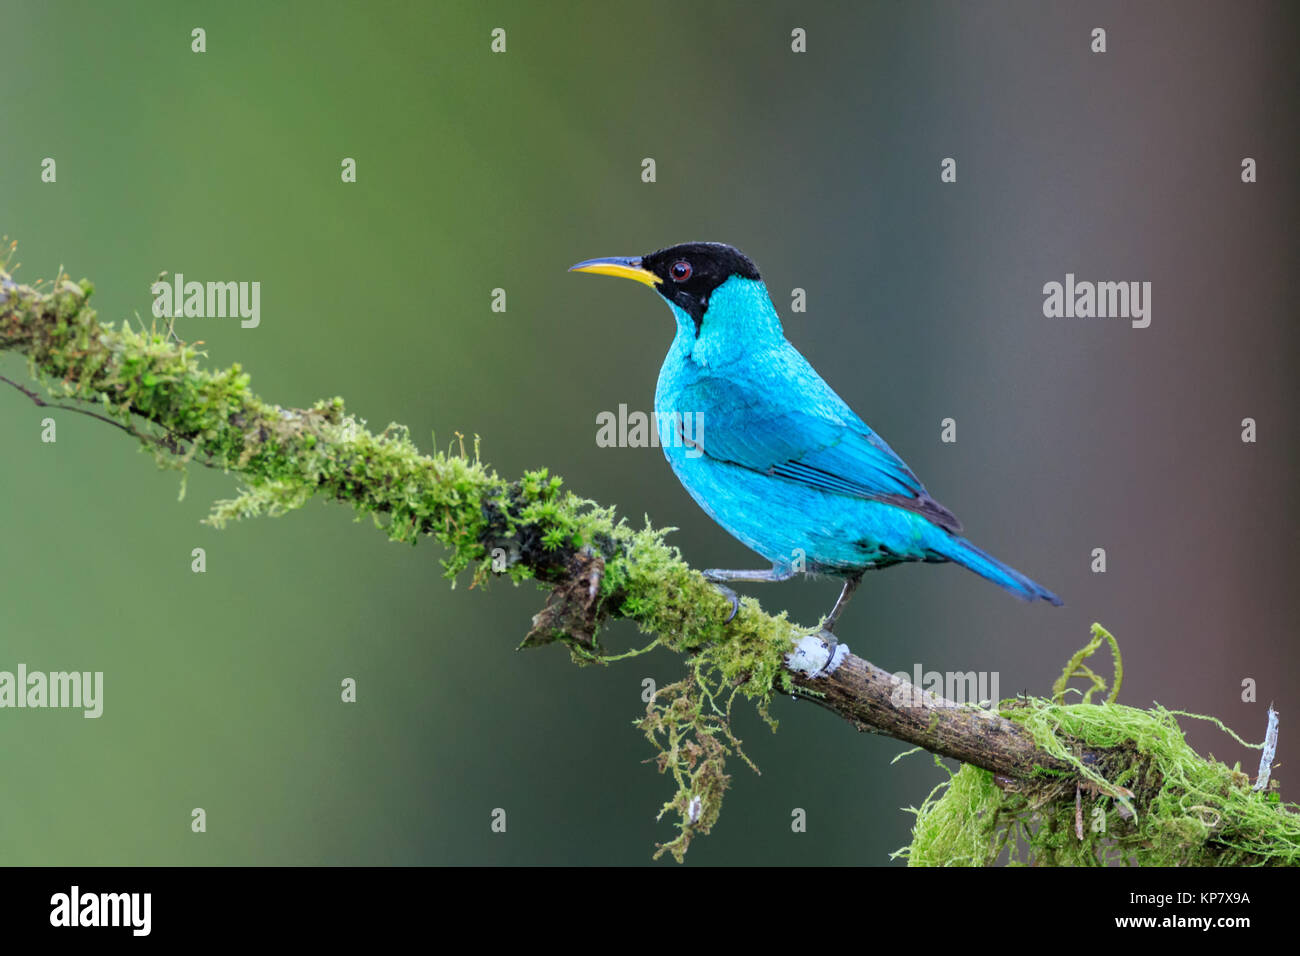 Green Honeycreeper on Branch in Costa Rica Rain Forest Stock Photo